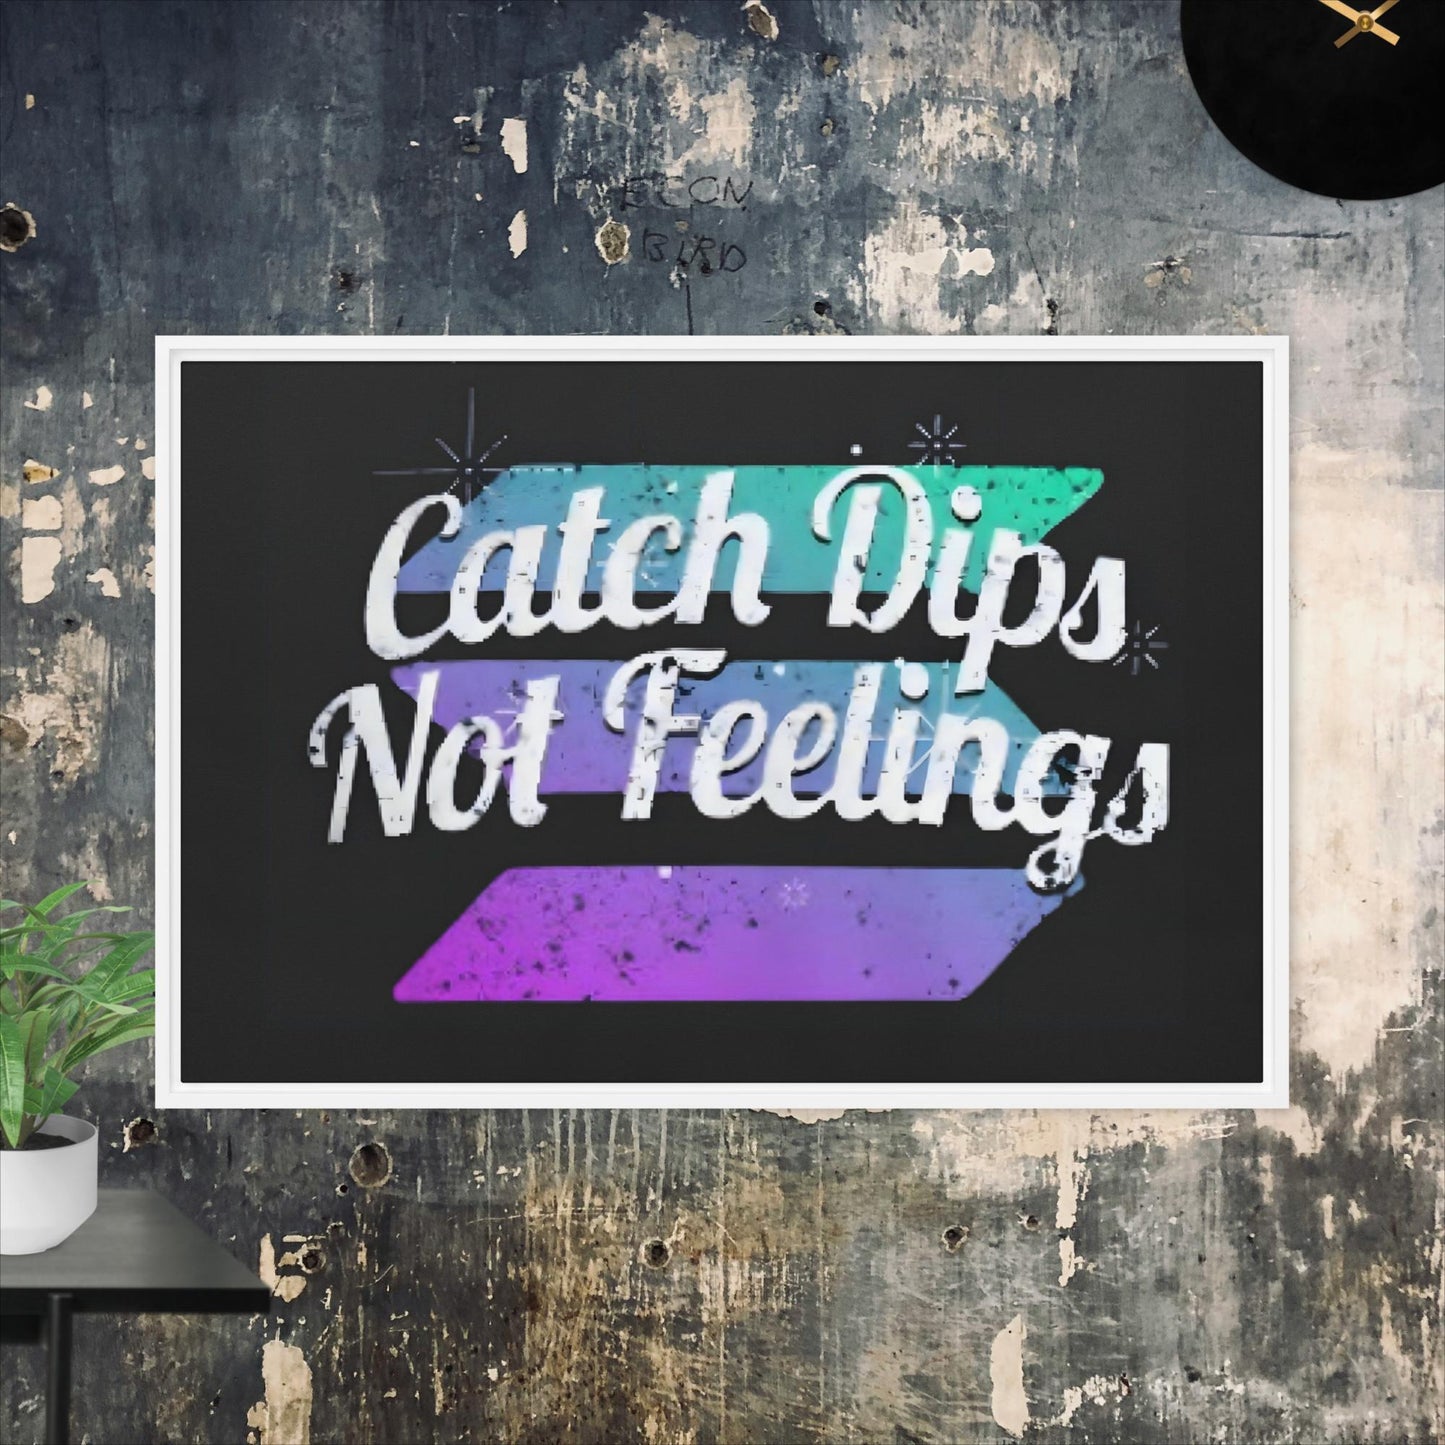 SOL Catch Dips - Framed Canvas